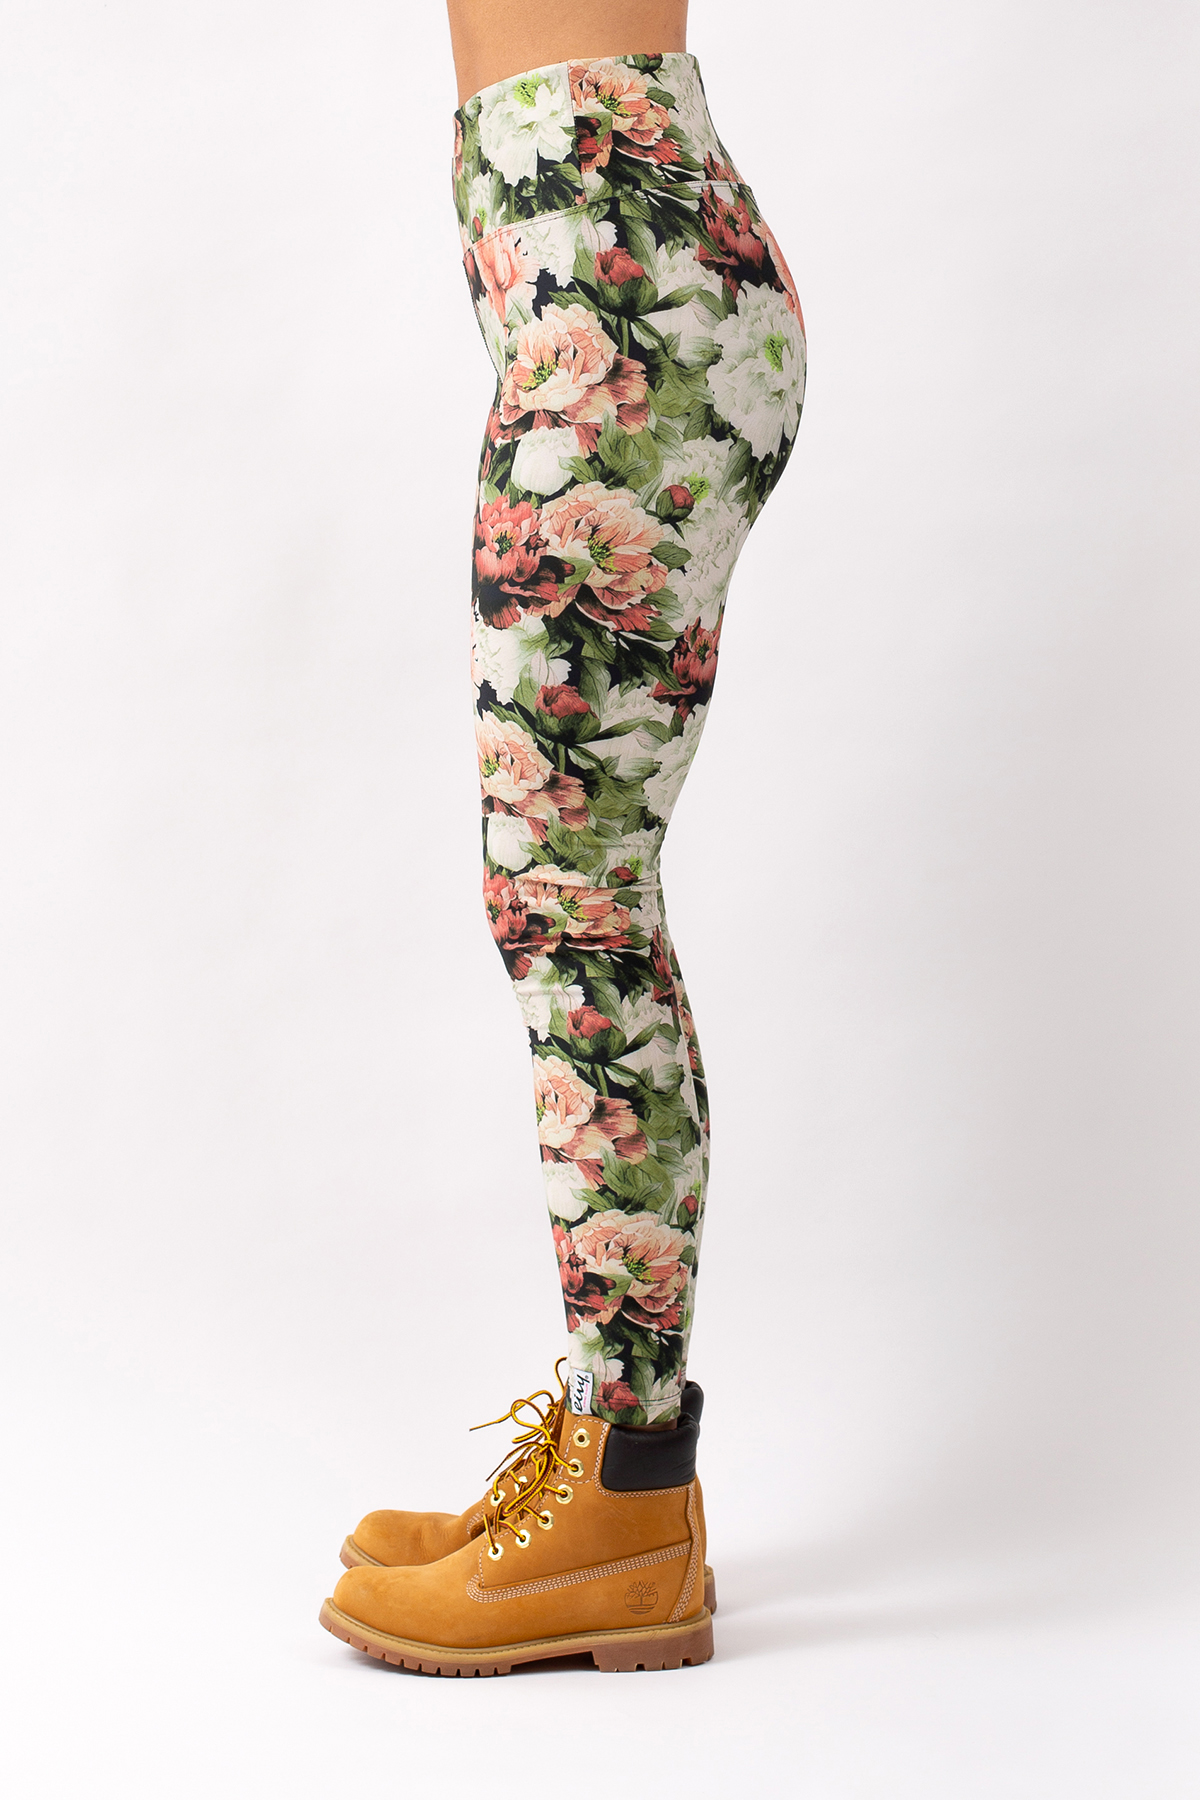 Base Layer | Icecold Tights - Autumn Bloom | M